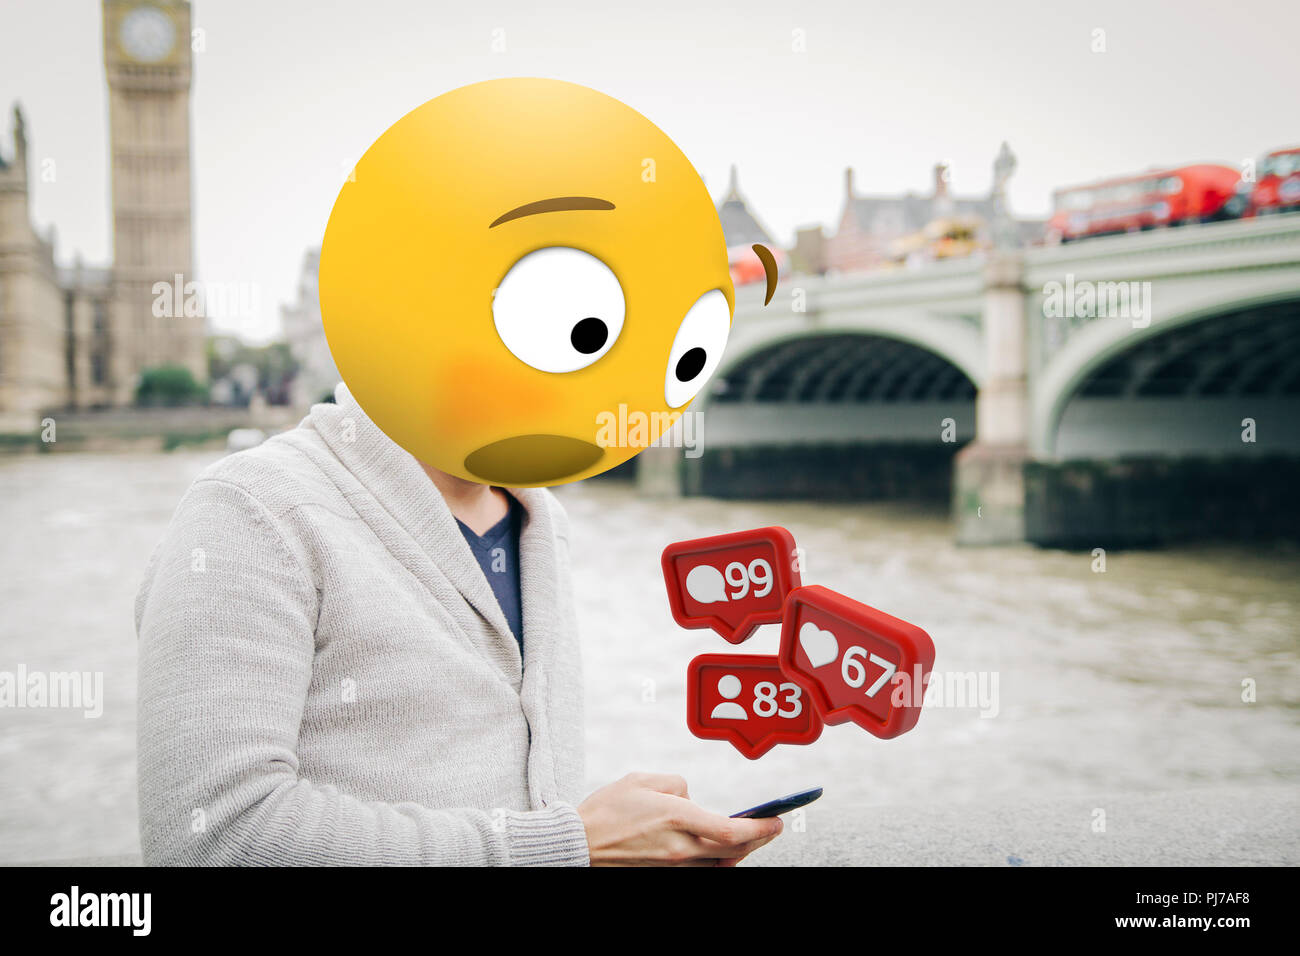 man with emoji head surprised looking at the smartphone al london city Stock Photo